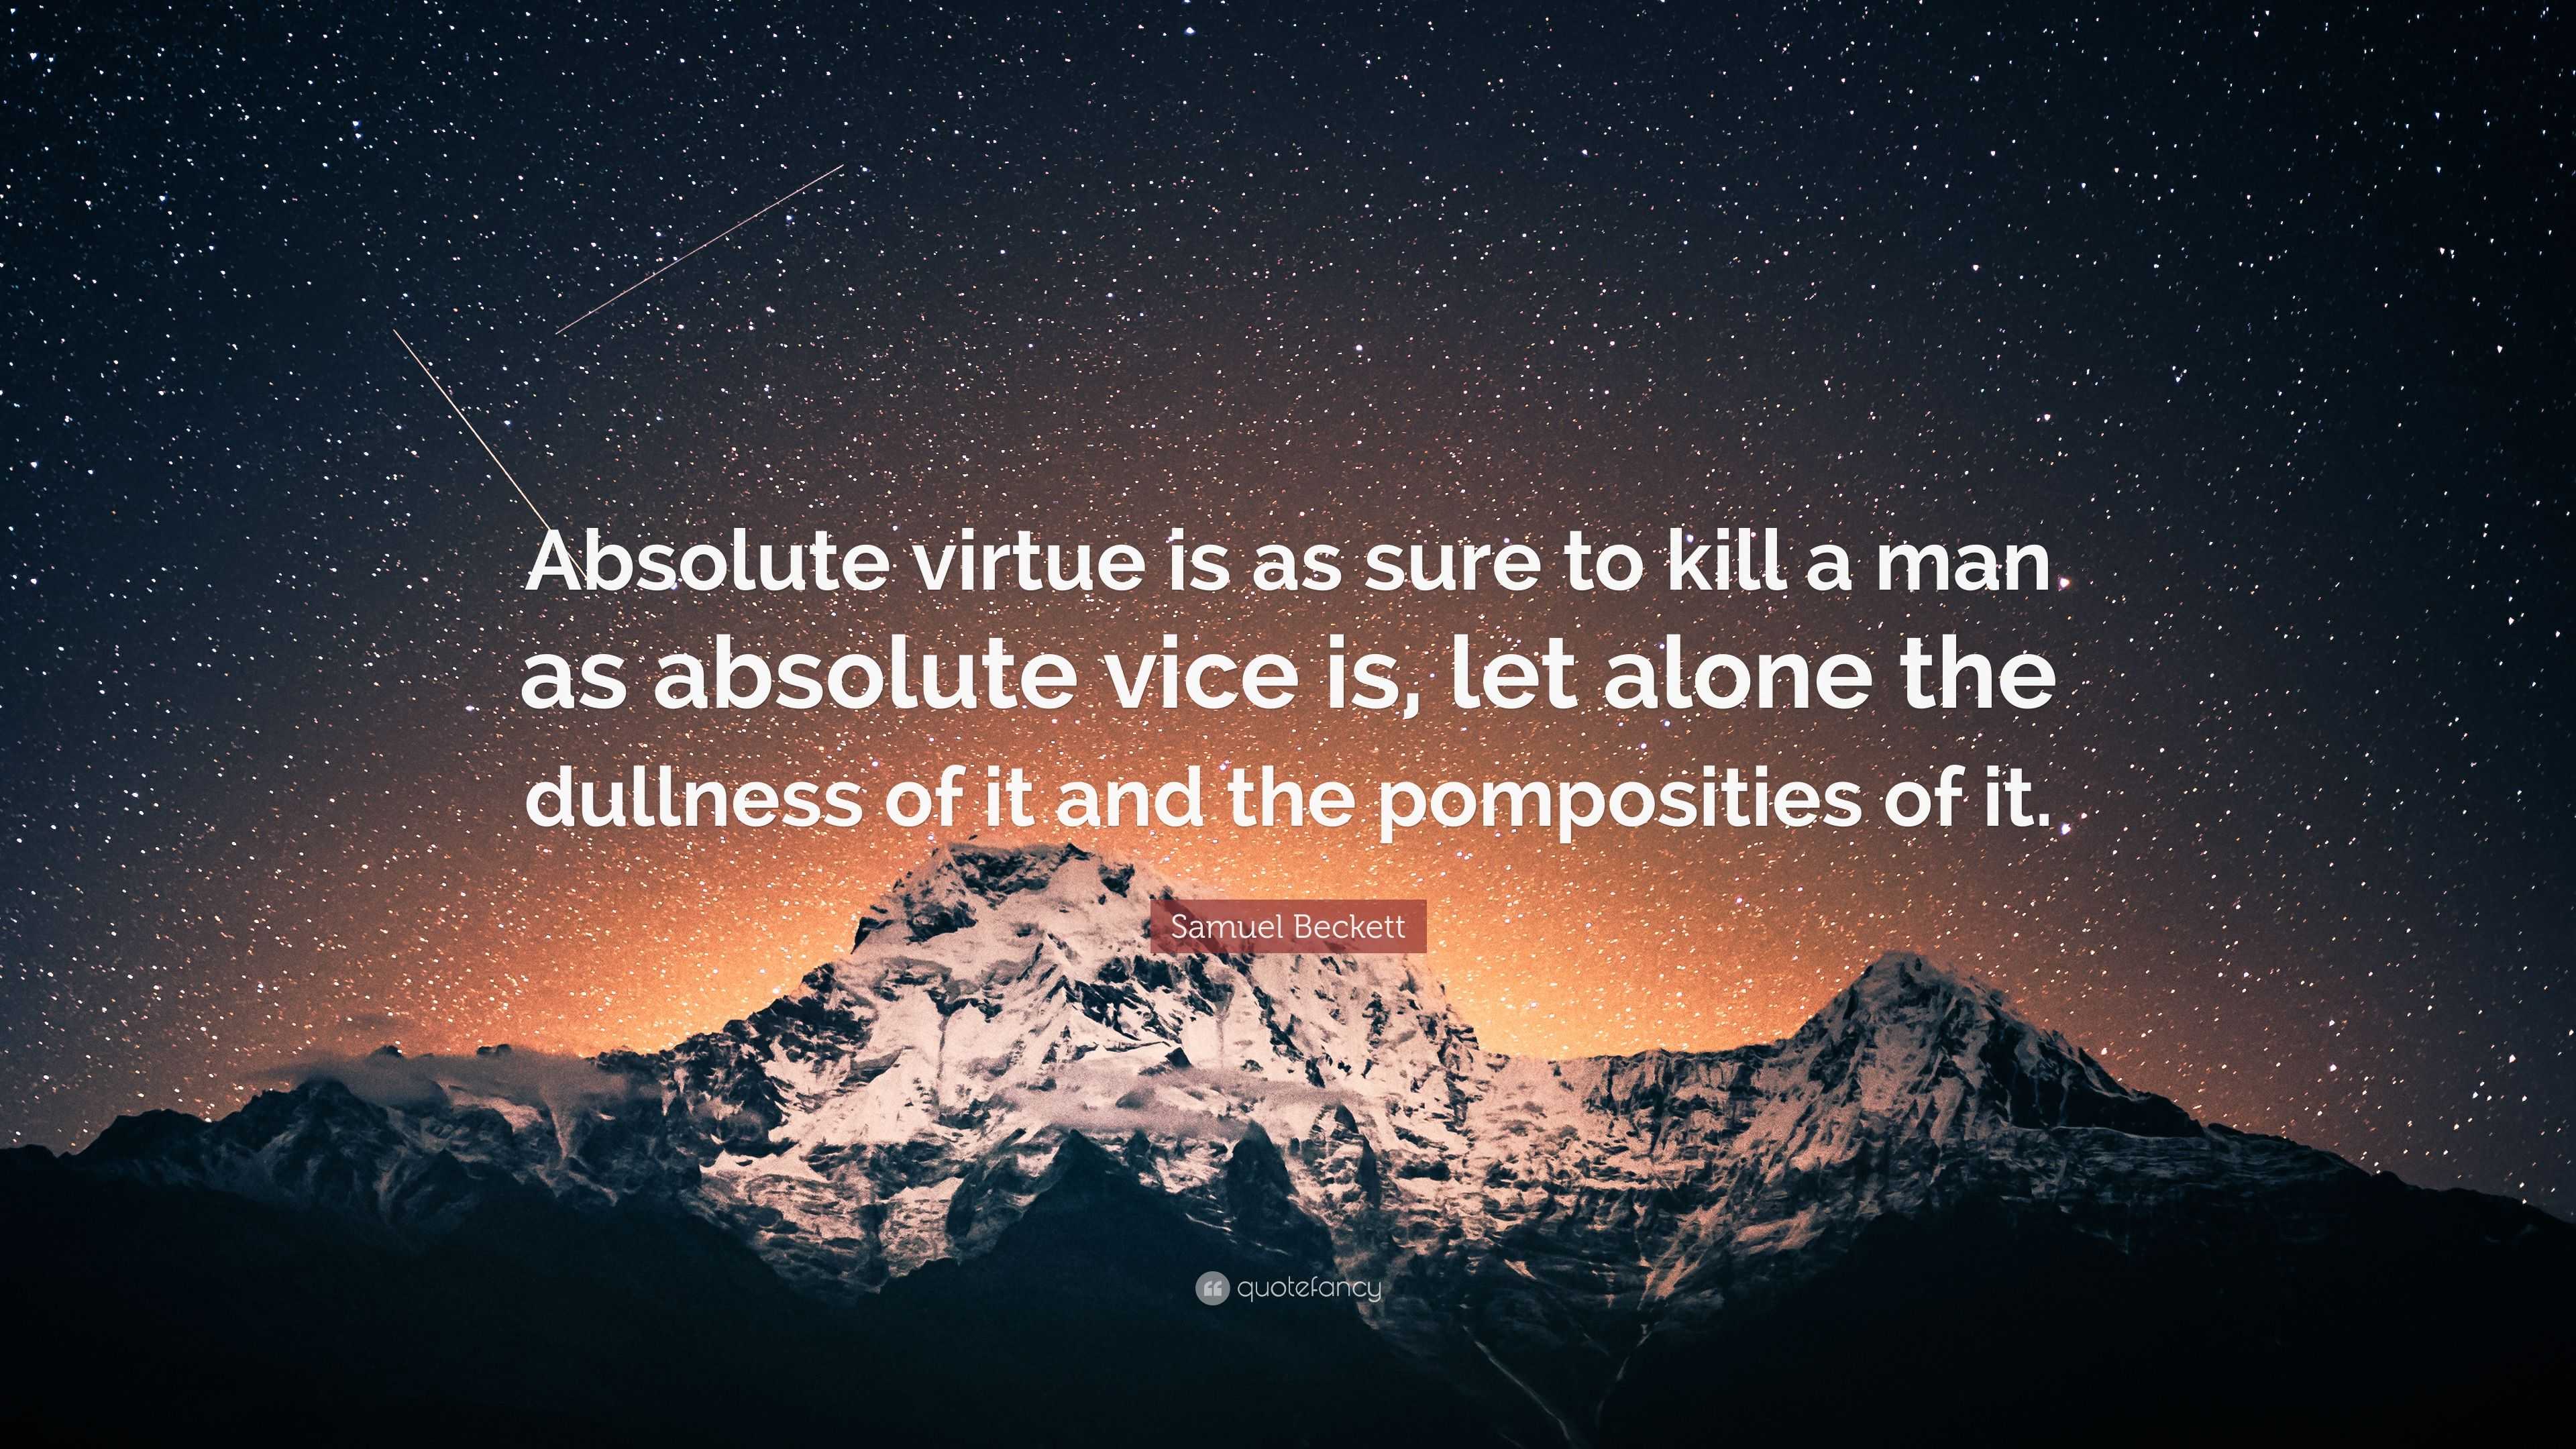 Samuel Beckett Quote: “Absolute virtue is as sure to kill a man as ...